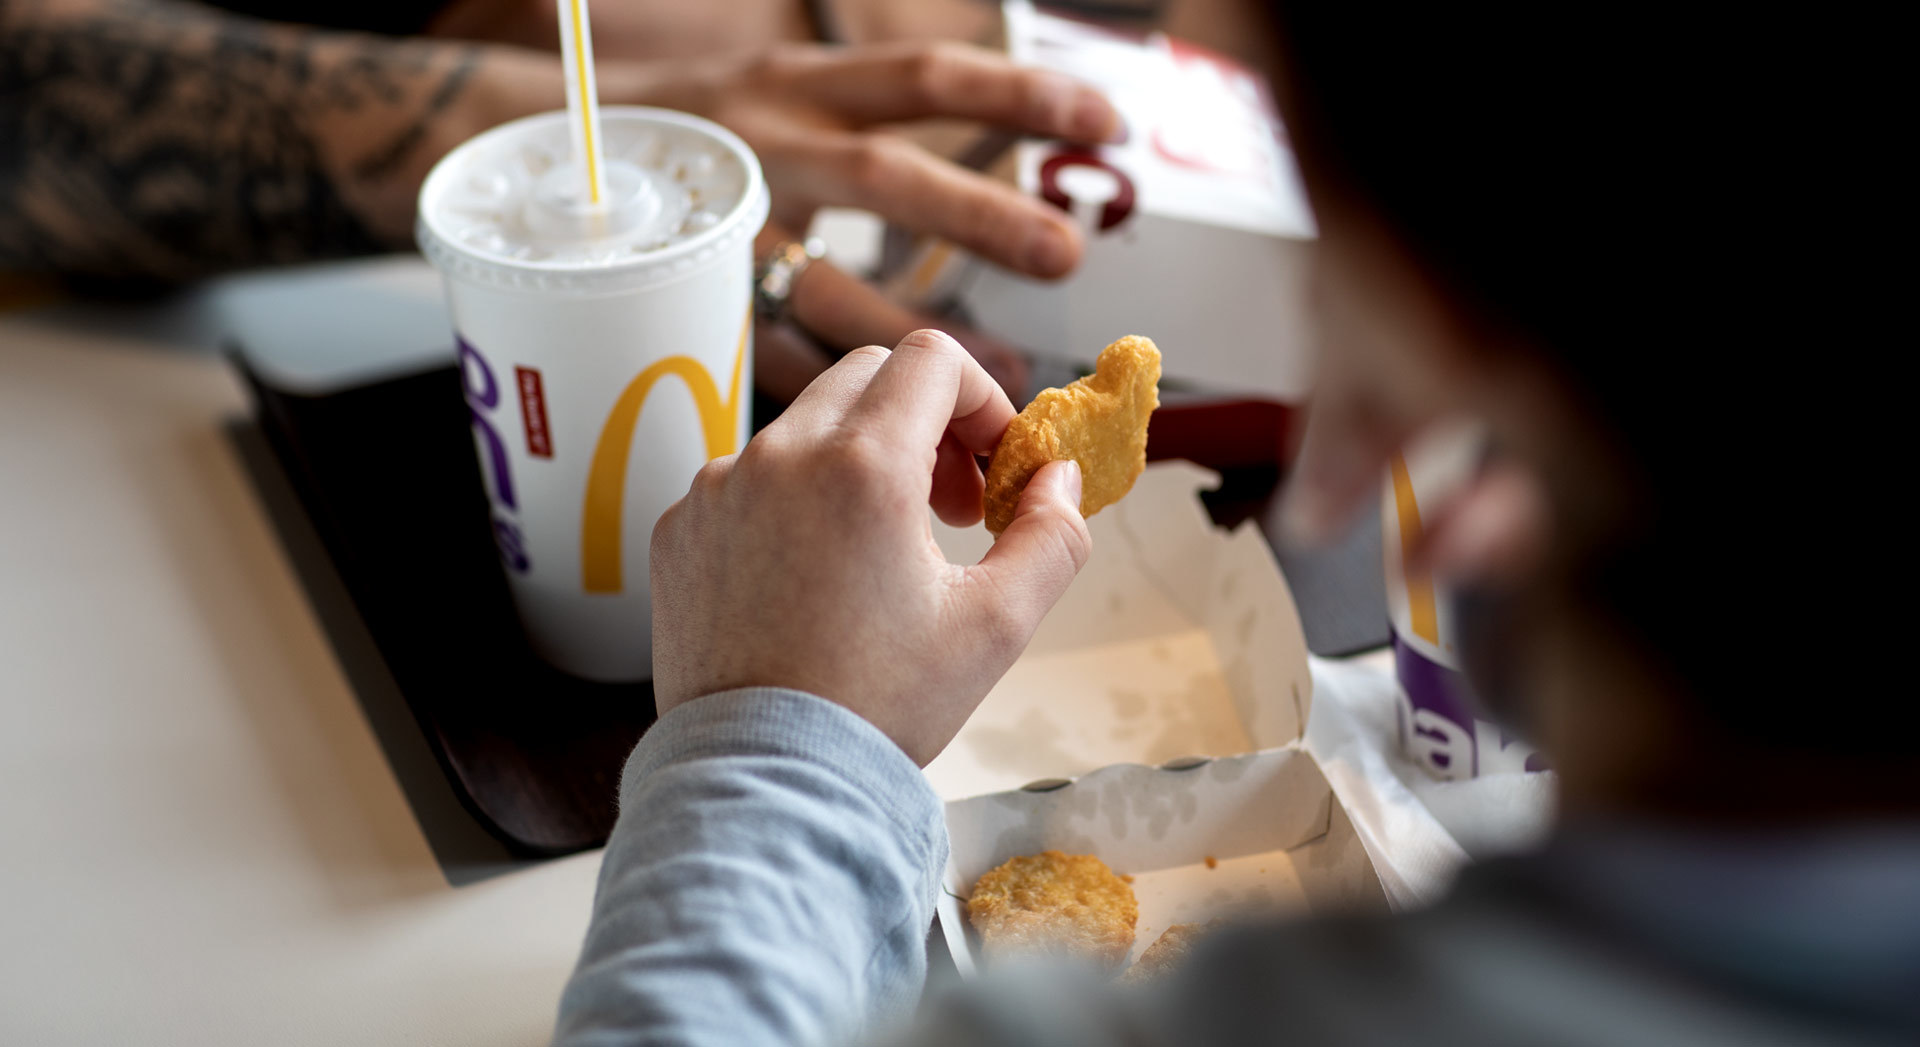 Know Our Food - Is it true that McDonald's chicken nuggets are chemically treated to prevent food poisoning?